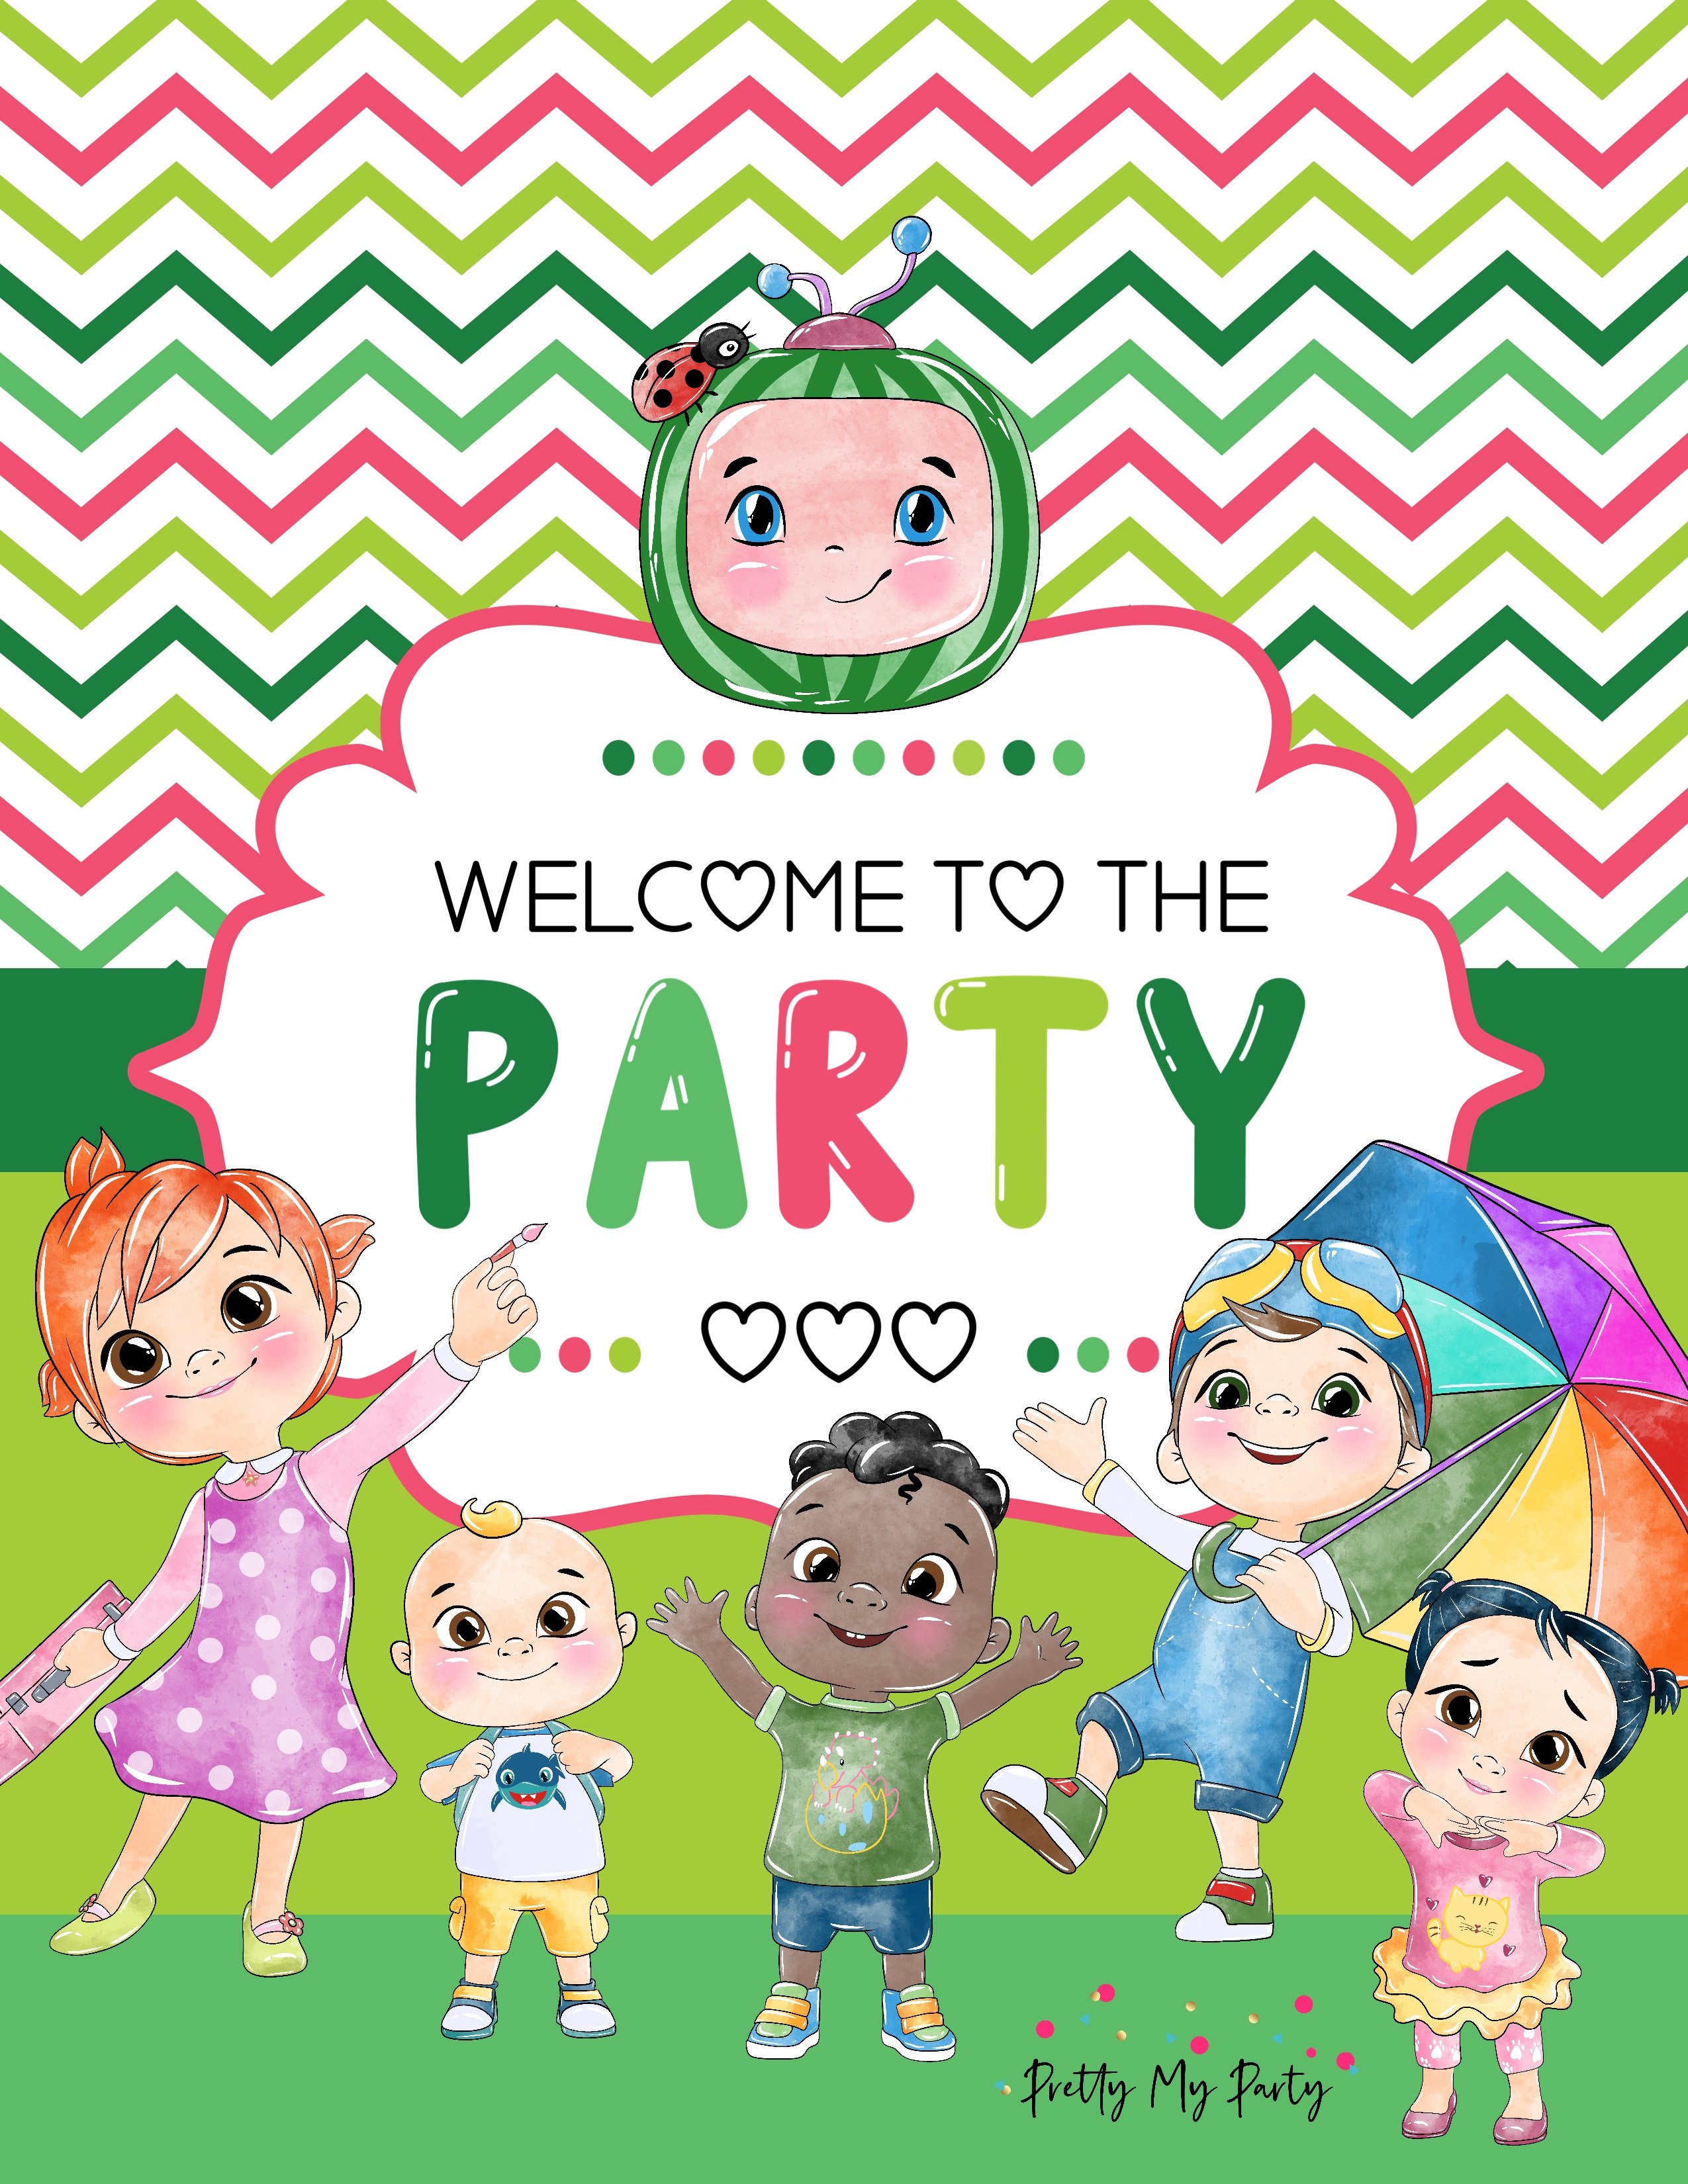 Grab your FREE Cocomelon Party Sign for your child's party on Pretty My Party!